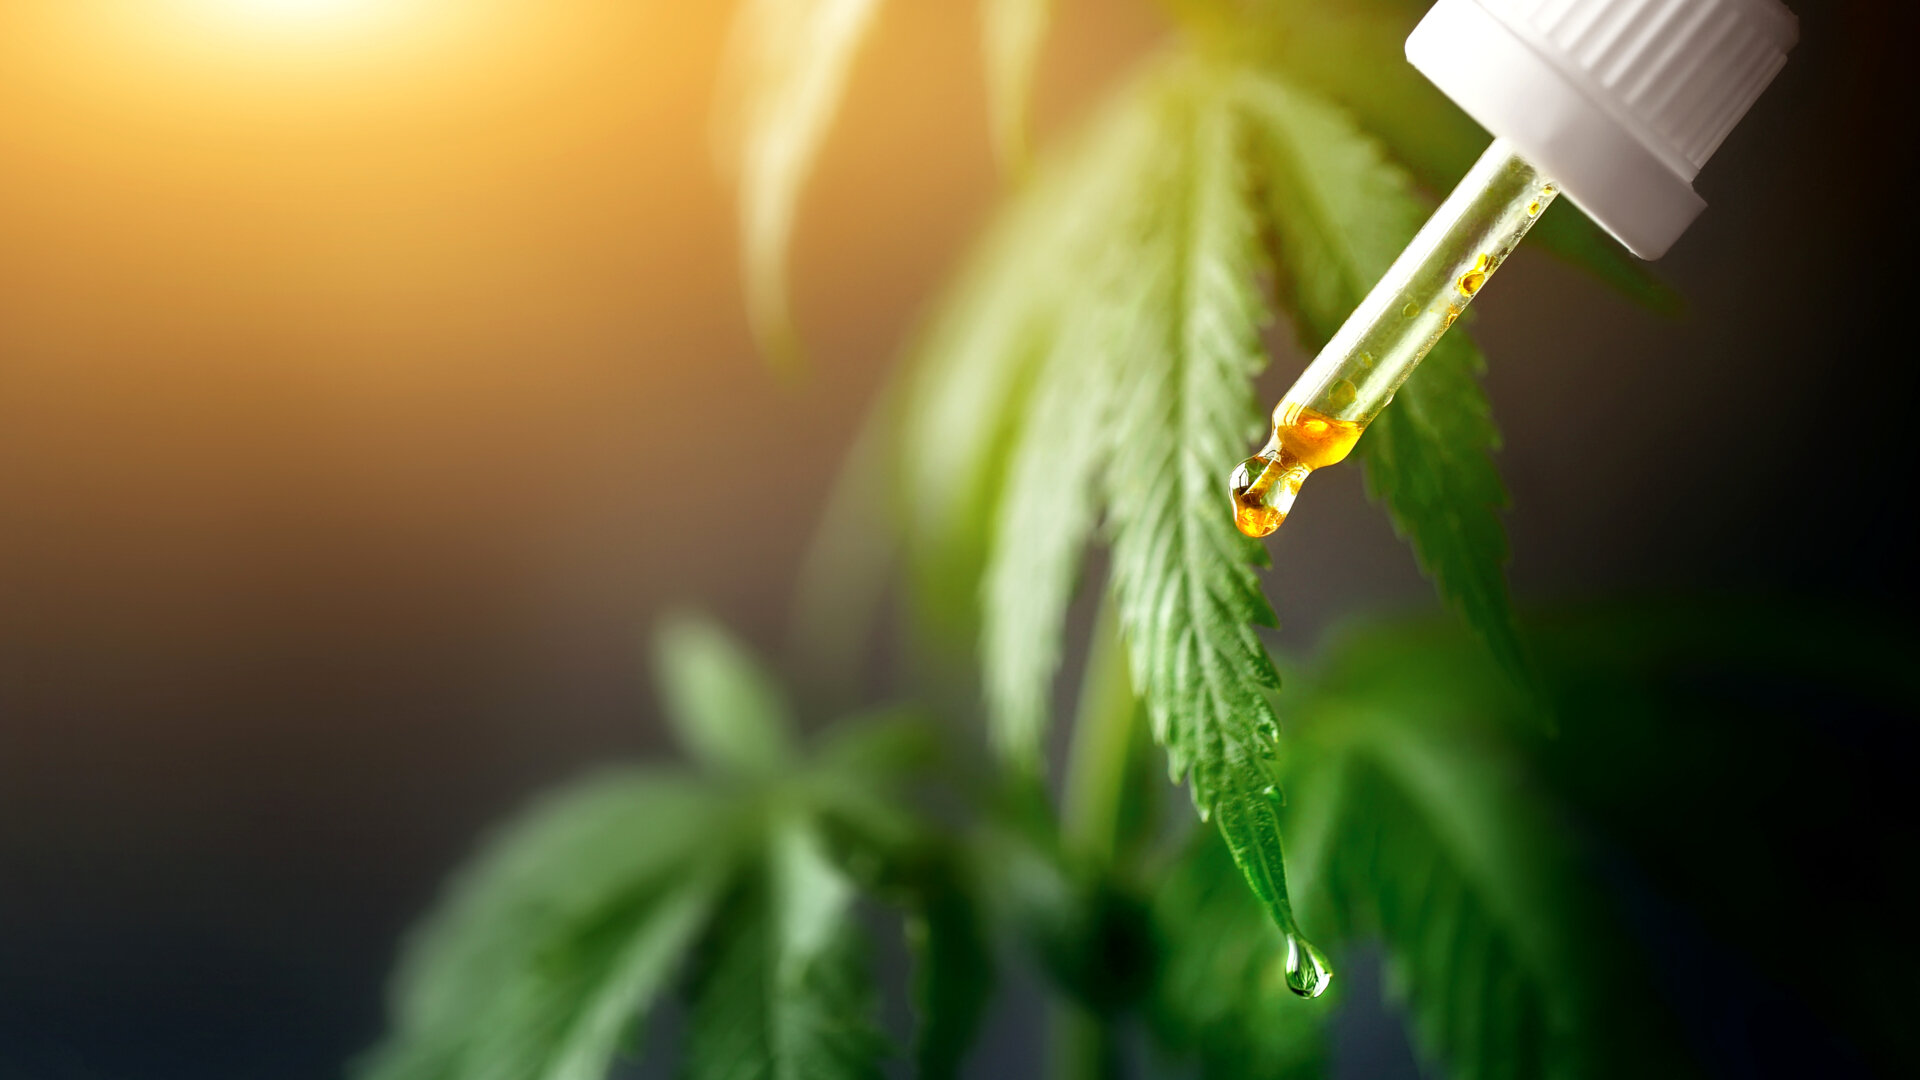 Cannabidiol: The quest for a new non-opioid analgesic